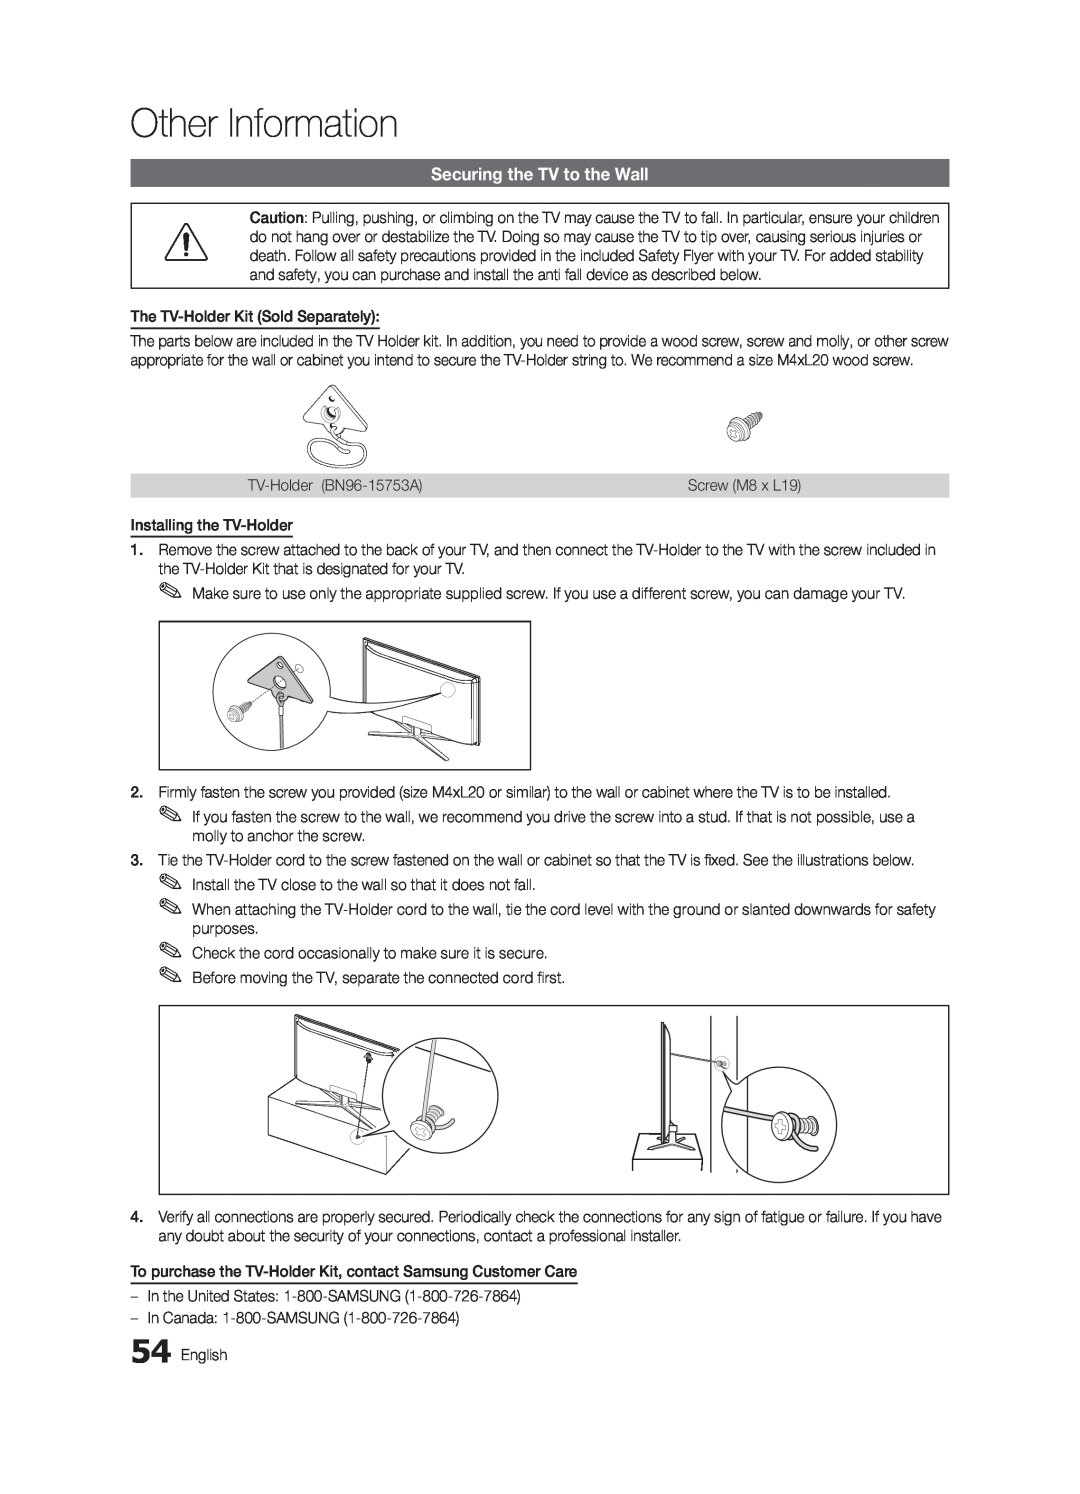 Samsung 6800 user manual Securing the TV to the Wall, Other Information 